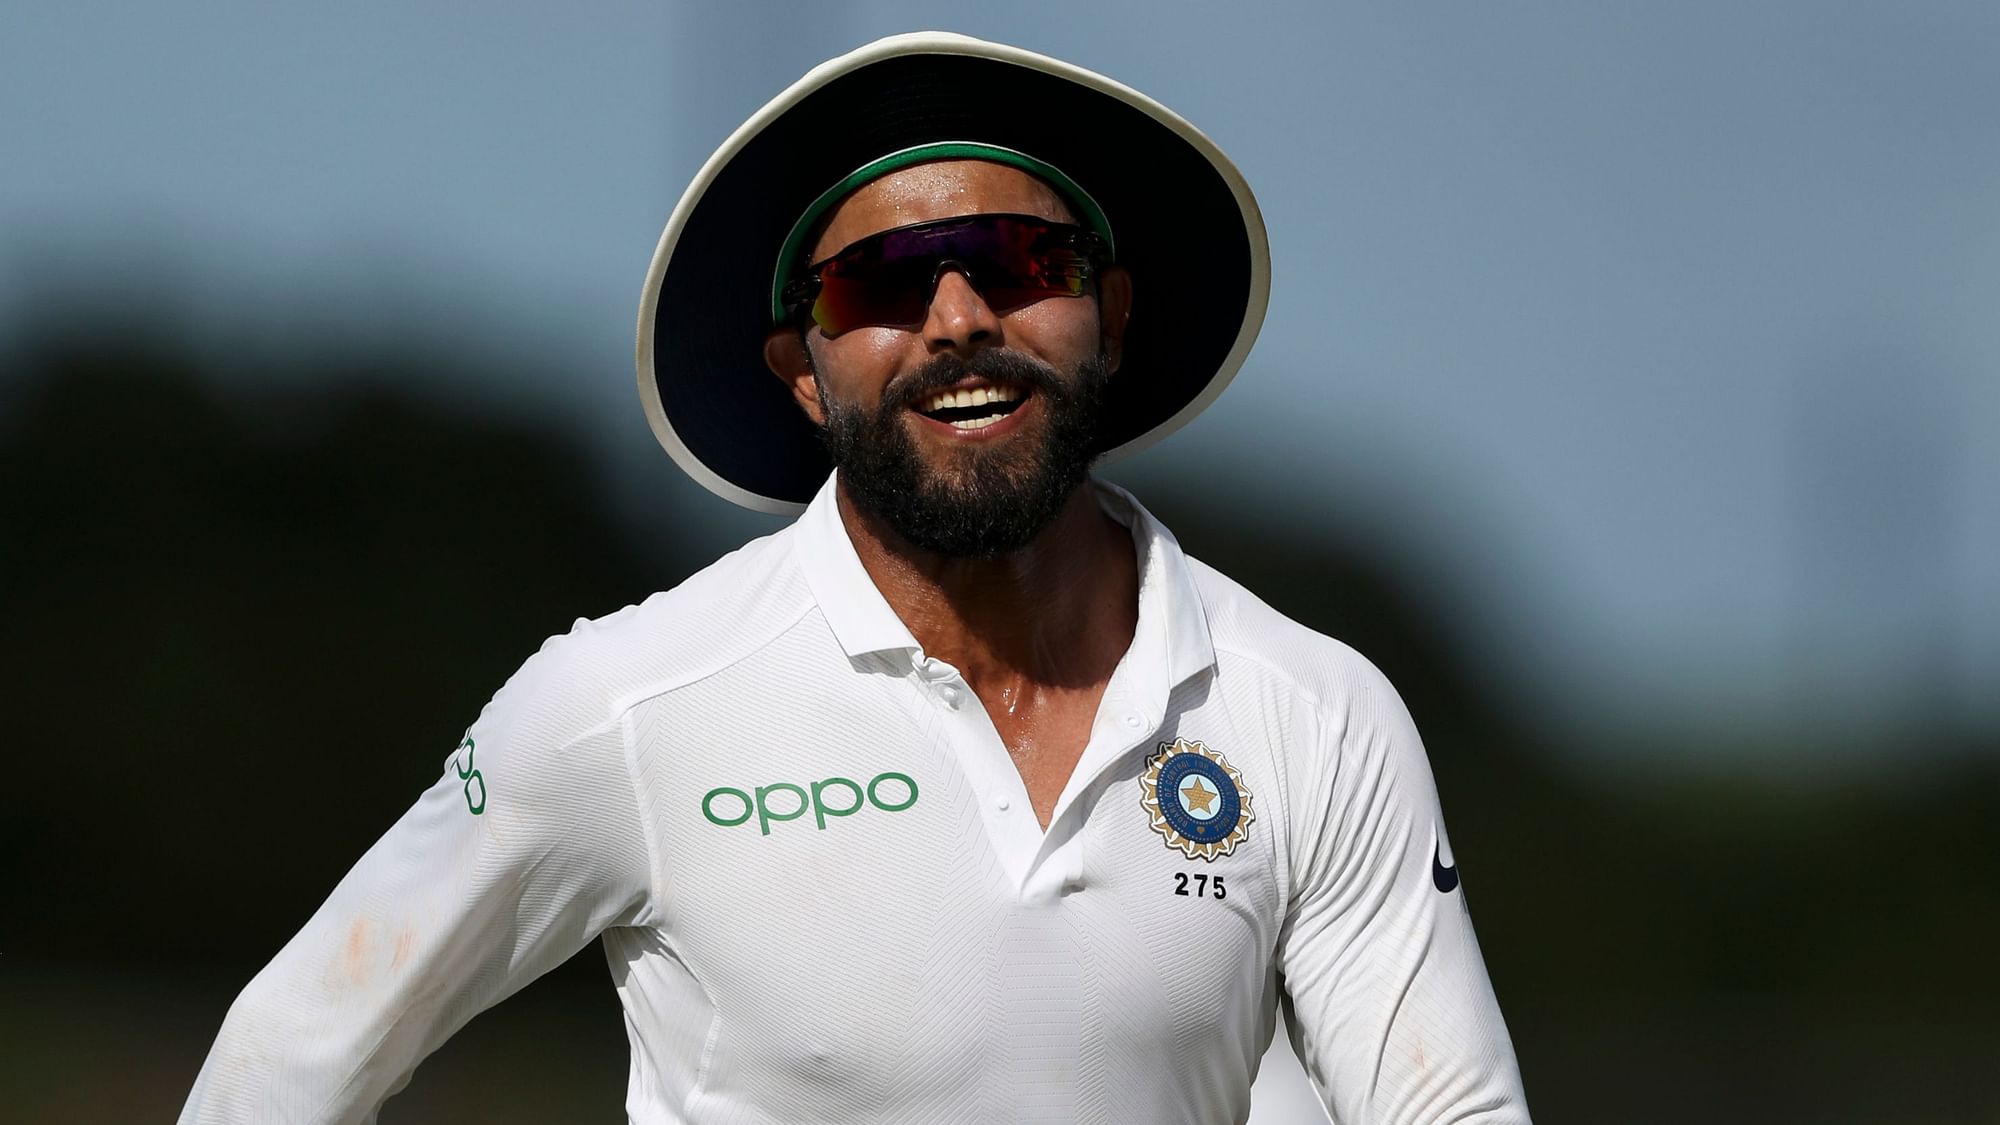 Ravindra Jadeja scored a defiant half-century and took two wickets in the first Test, helping India win by 318 runs in Antigua.